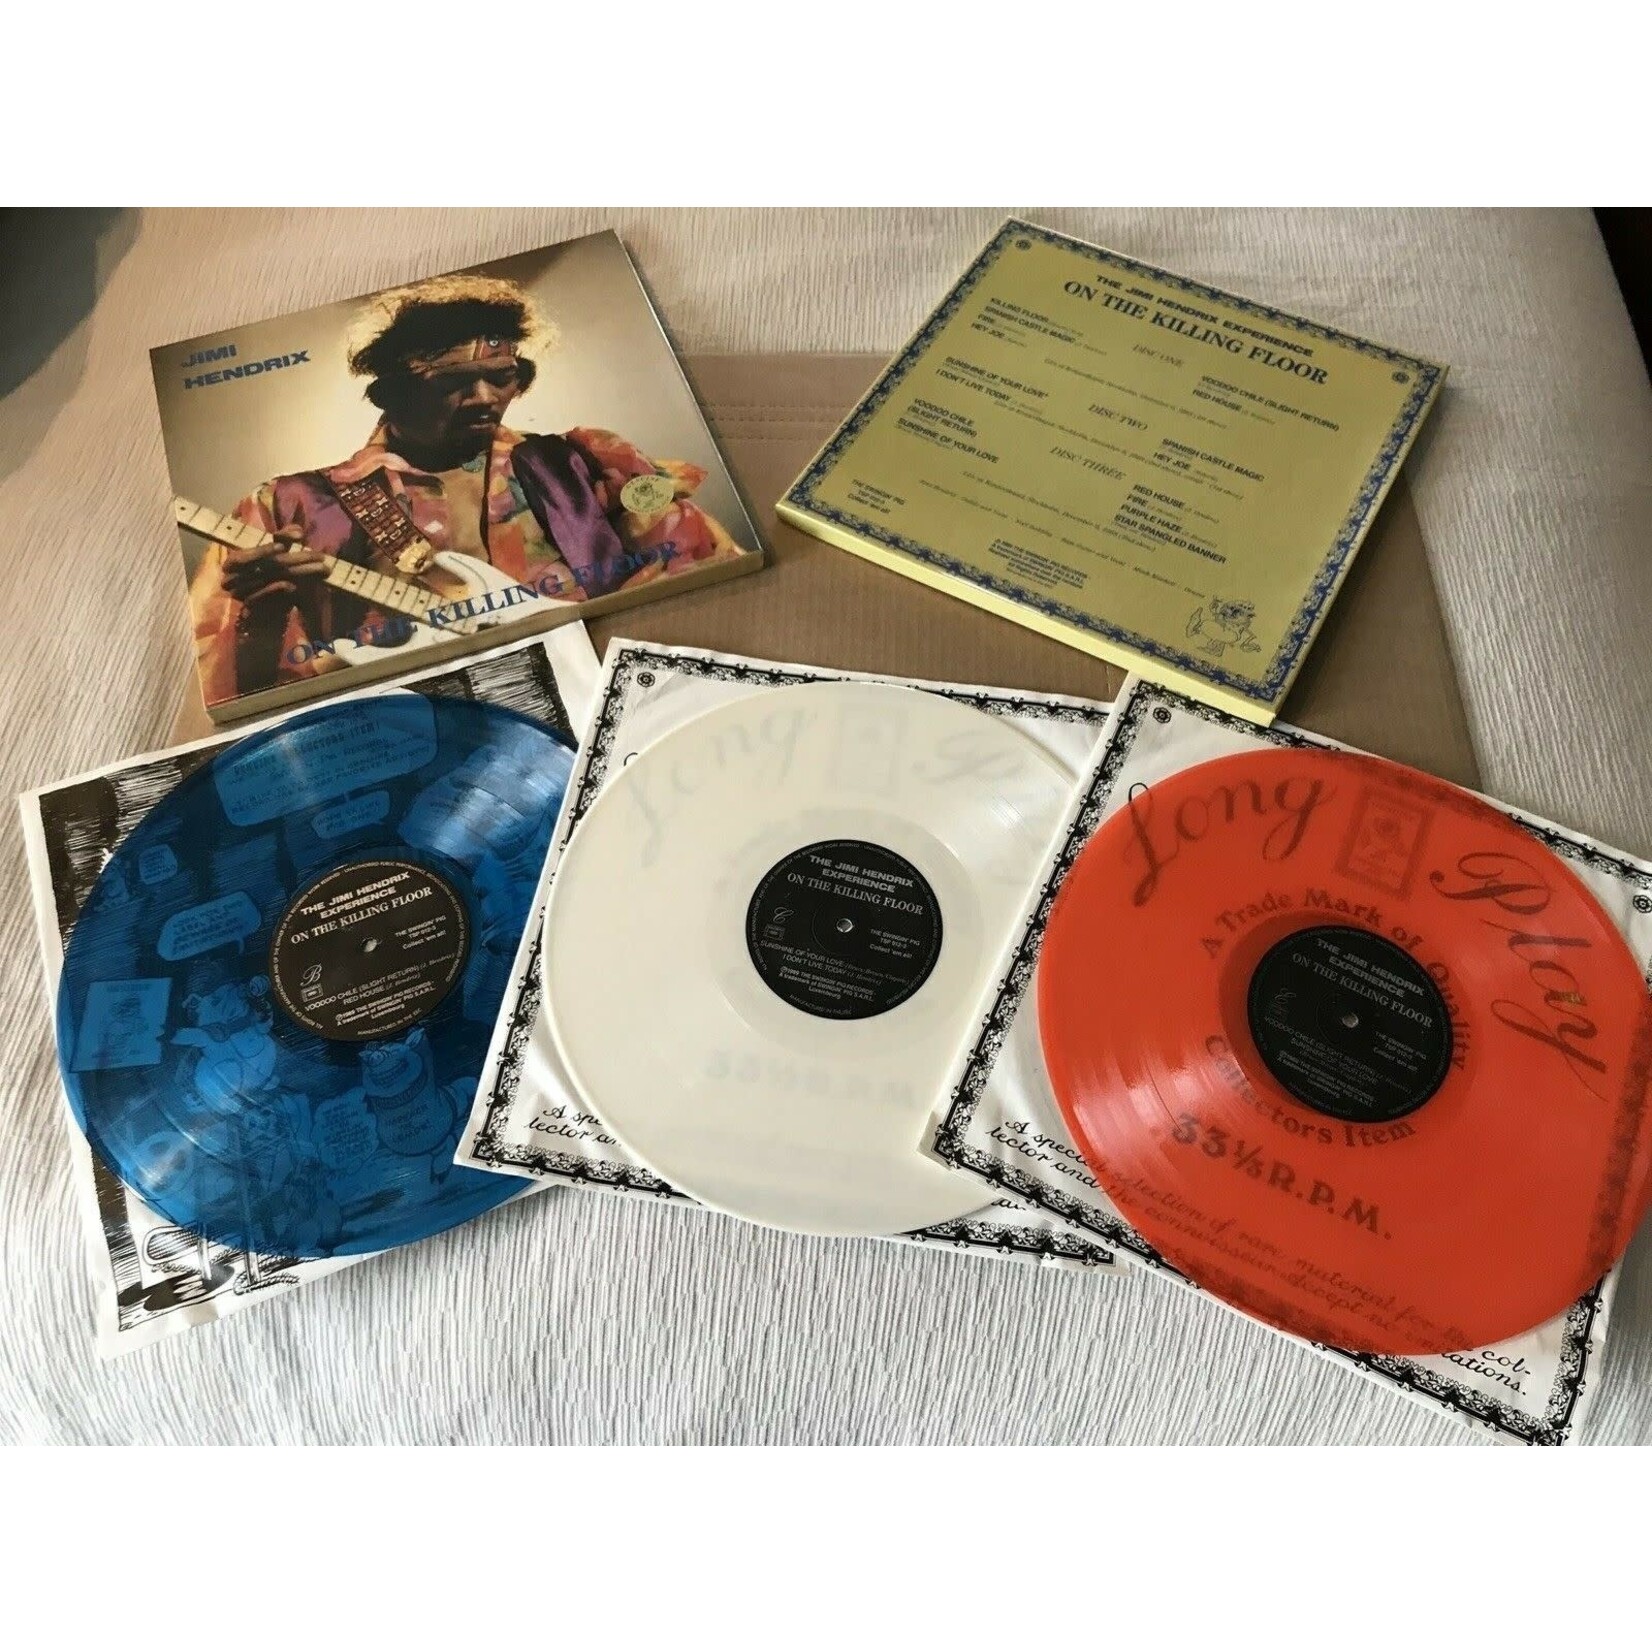 [Kollectibles] Hendrix, Jimi: On the Killing Floor (1989 "Luxembourg", Unofficial Live, 3 LP coloured vinyl, Disc VG+) [KOLLECTIBLES]